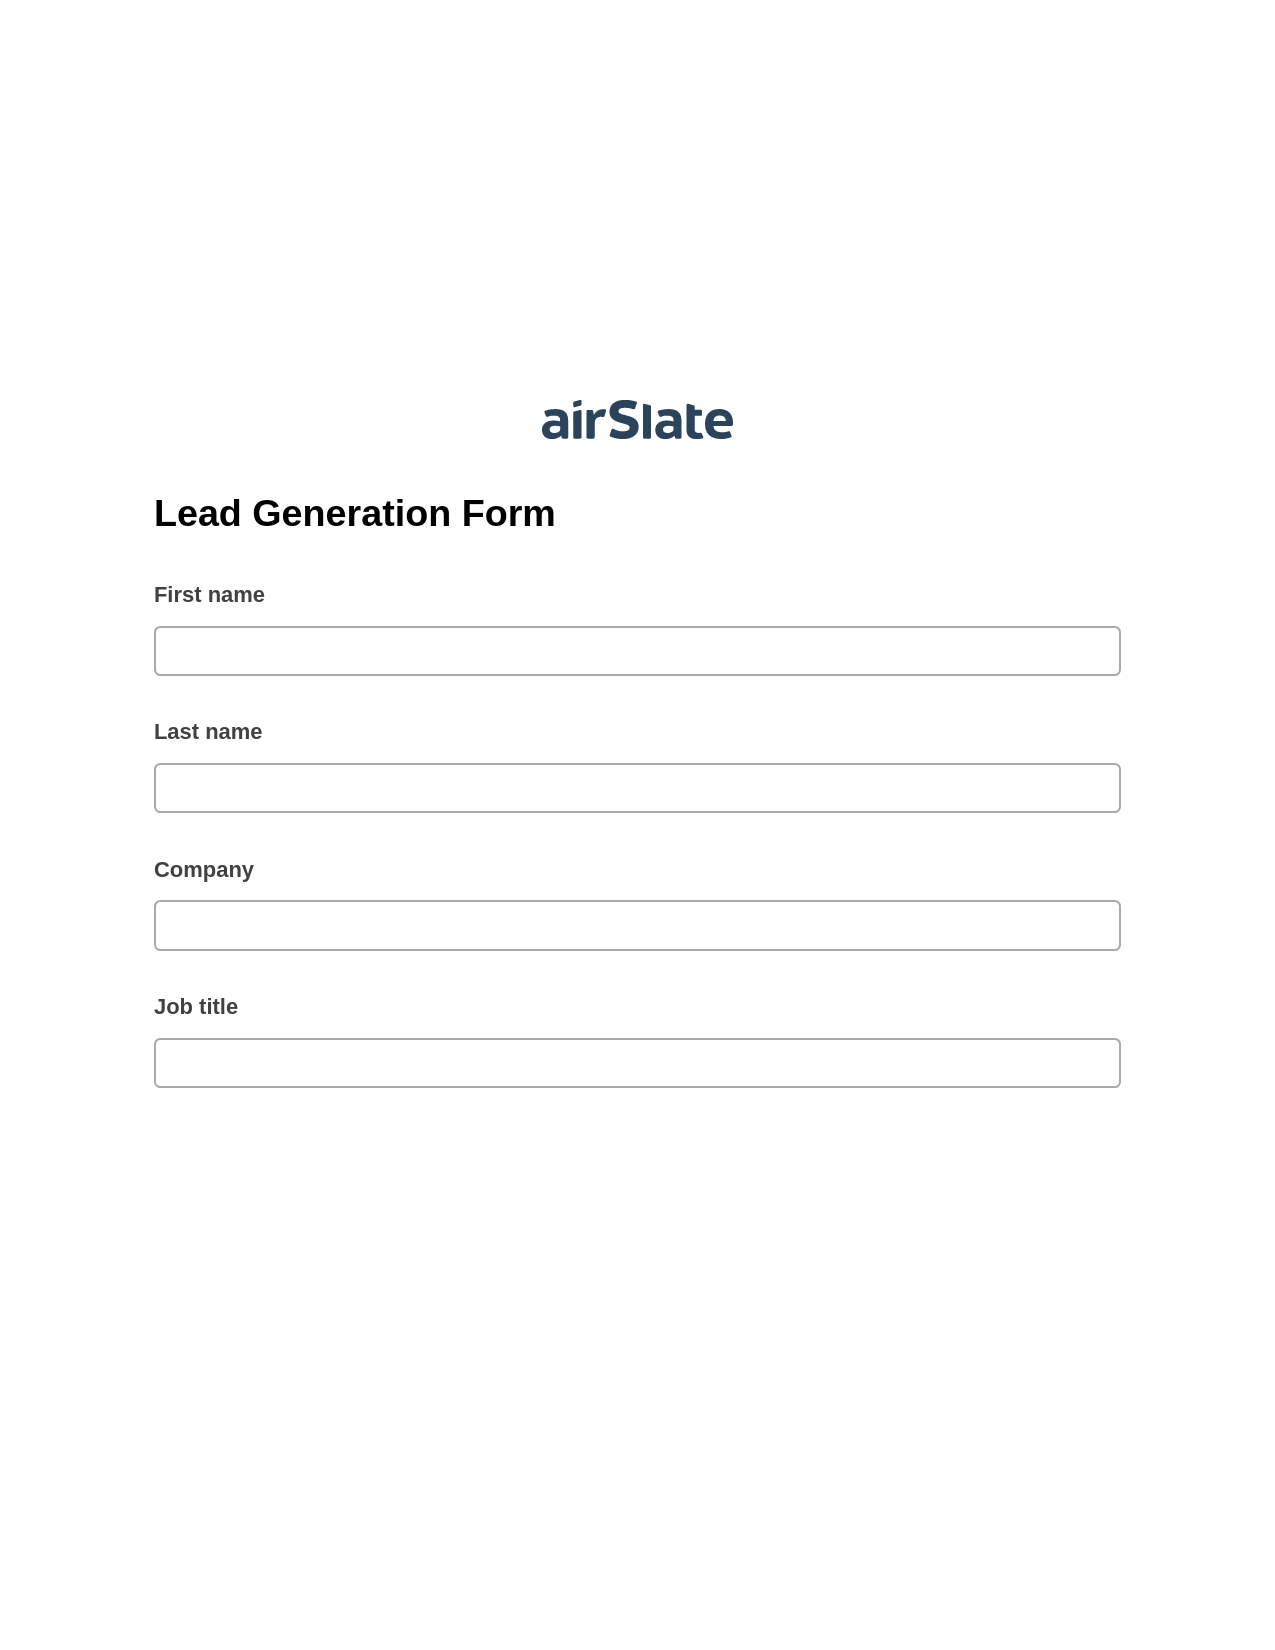 Lead Generation Form Pre-fill from Salesforce Records with SOQL Bot, Create Slate Reminder Bot, Archive to Dropbox Bot